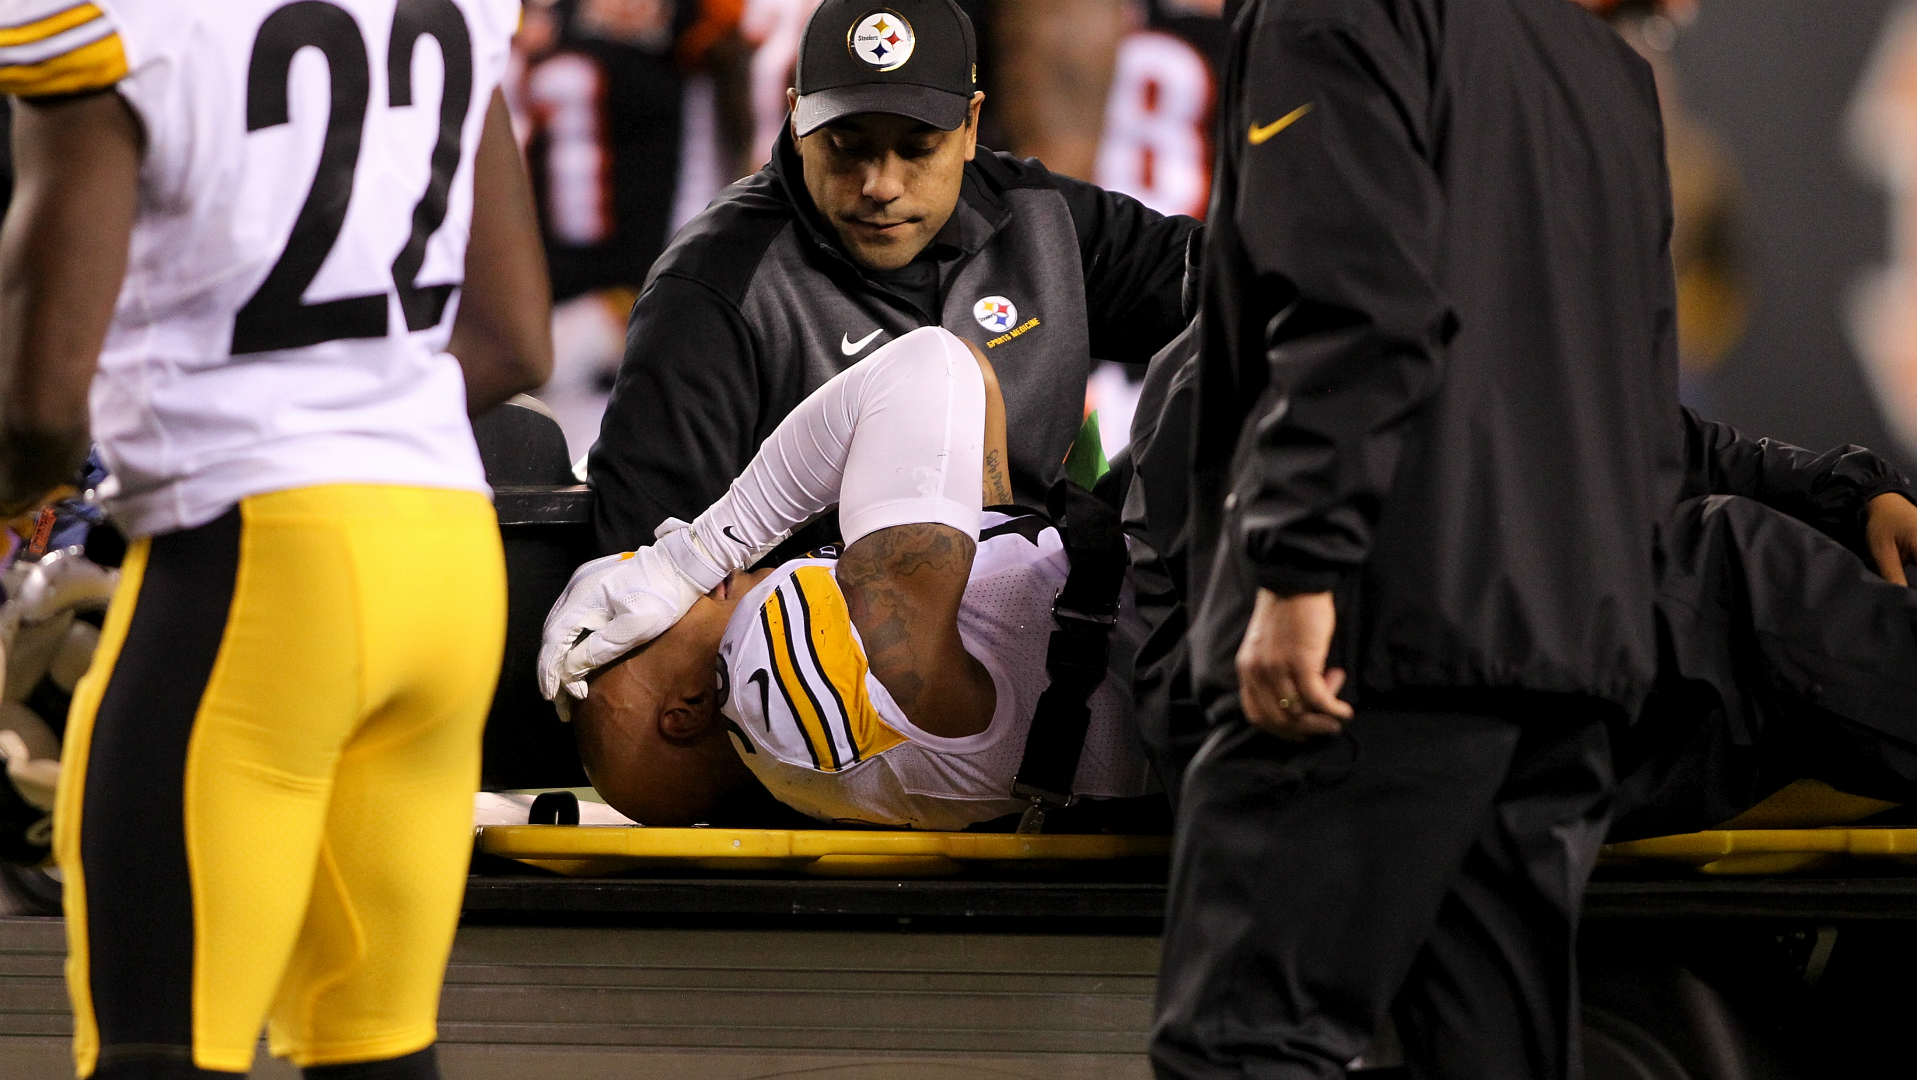 Ryan Shazier injury update: Steelers LB hospitalized, improving after scary back injury